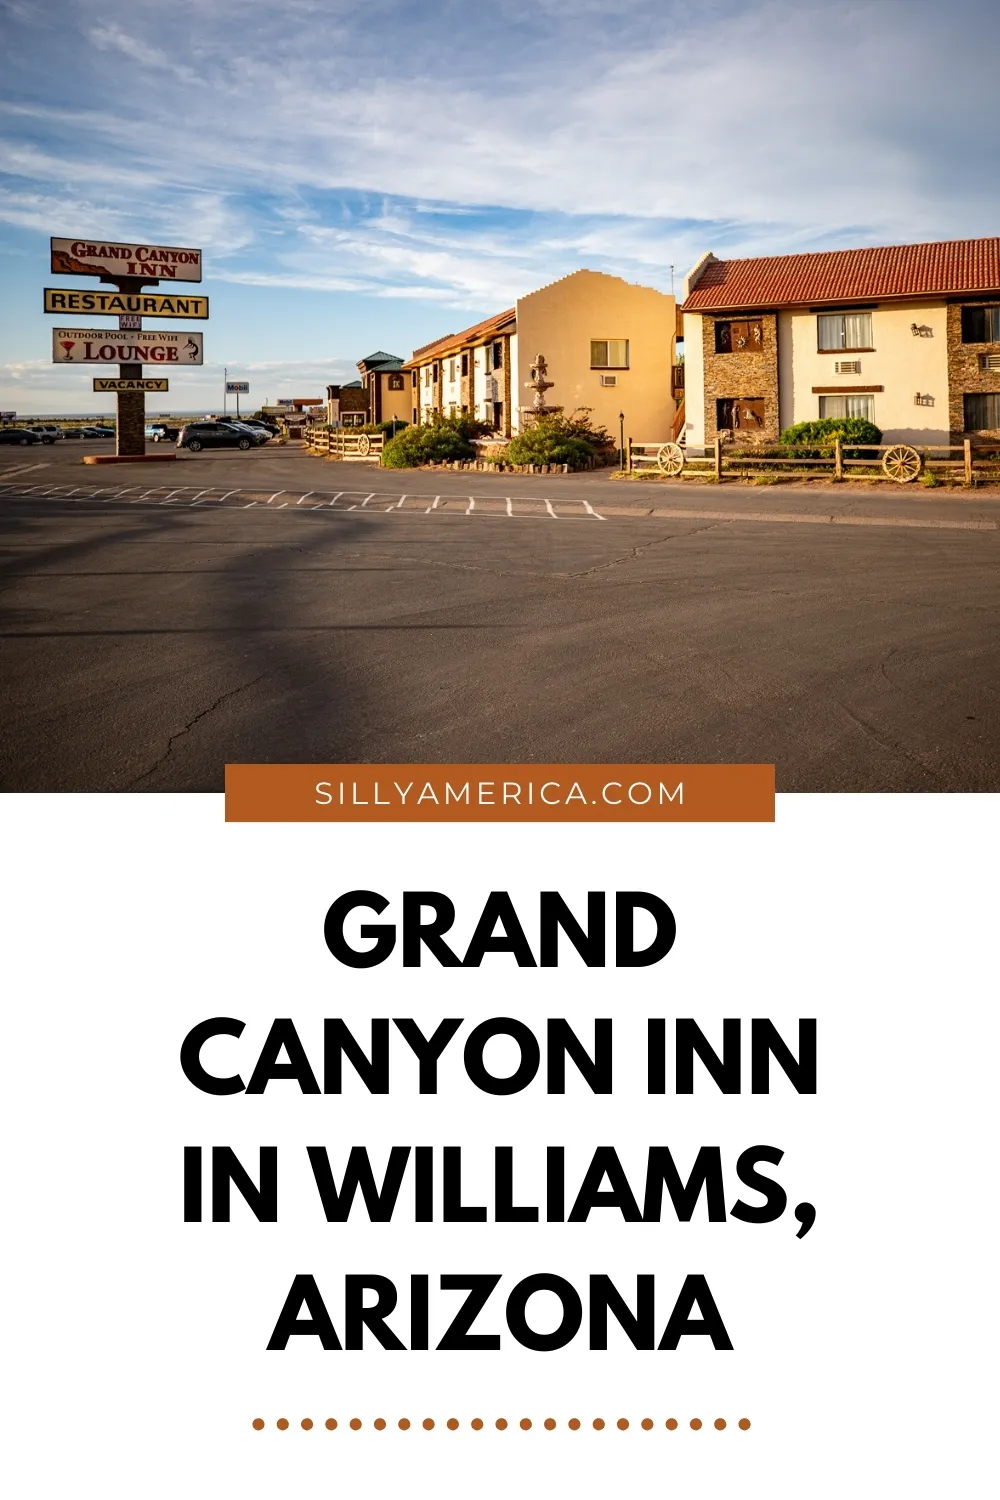 Looking for a grand place to stay on a Grand Canyon road trip? The Grand Canyon Inn in Williams, Arizona is located only about 20 minutes from the Grand Canyon's south entrance, making it a convenient place to spend the night before or after visiting the National Park. Located near the entrance to the Grand Canyon and near Route 66 this hotel is convenient for road trippers looking for a place to spend the night in Arizona. #Route66 #Route66RoadTrip #GrandCanyon #GrandCanyonRoadTrip #Hotel